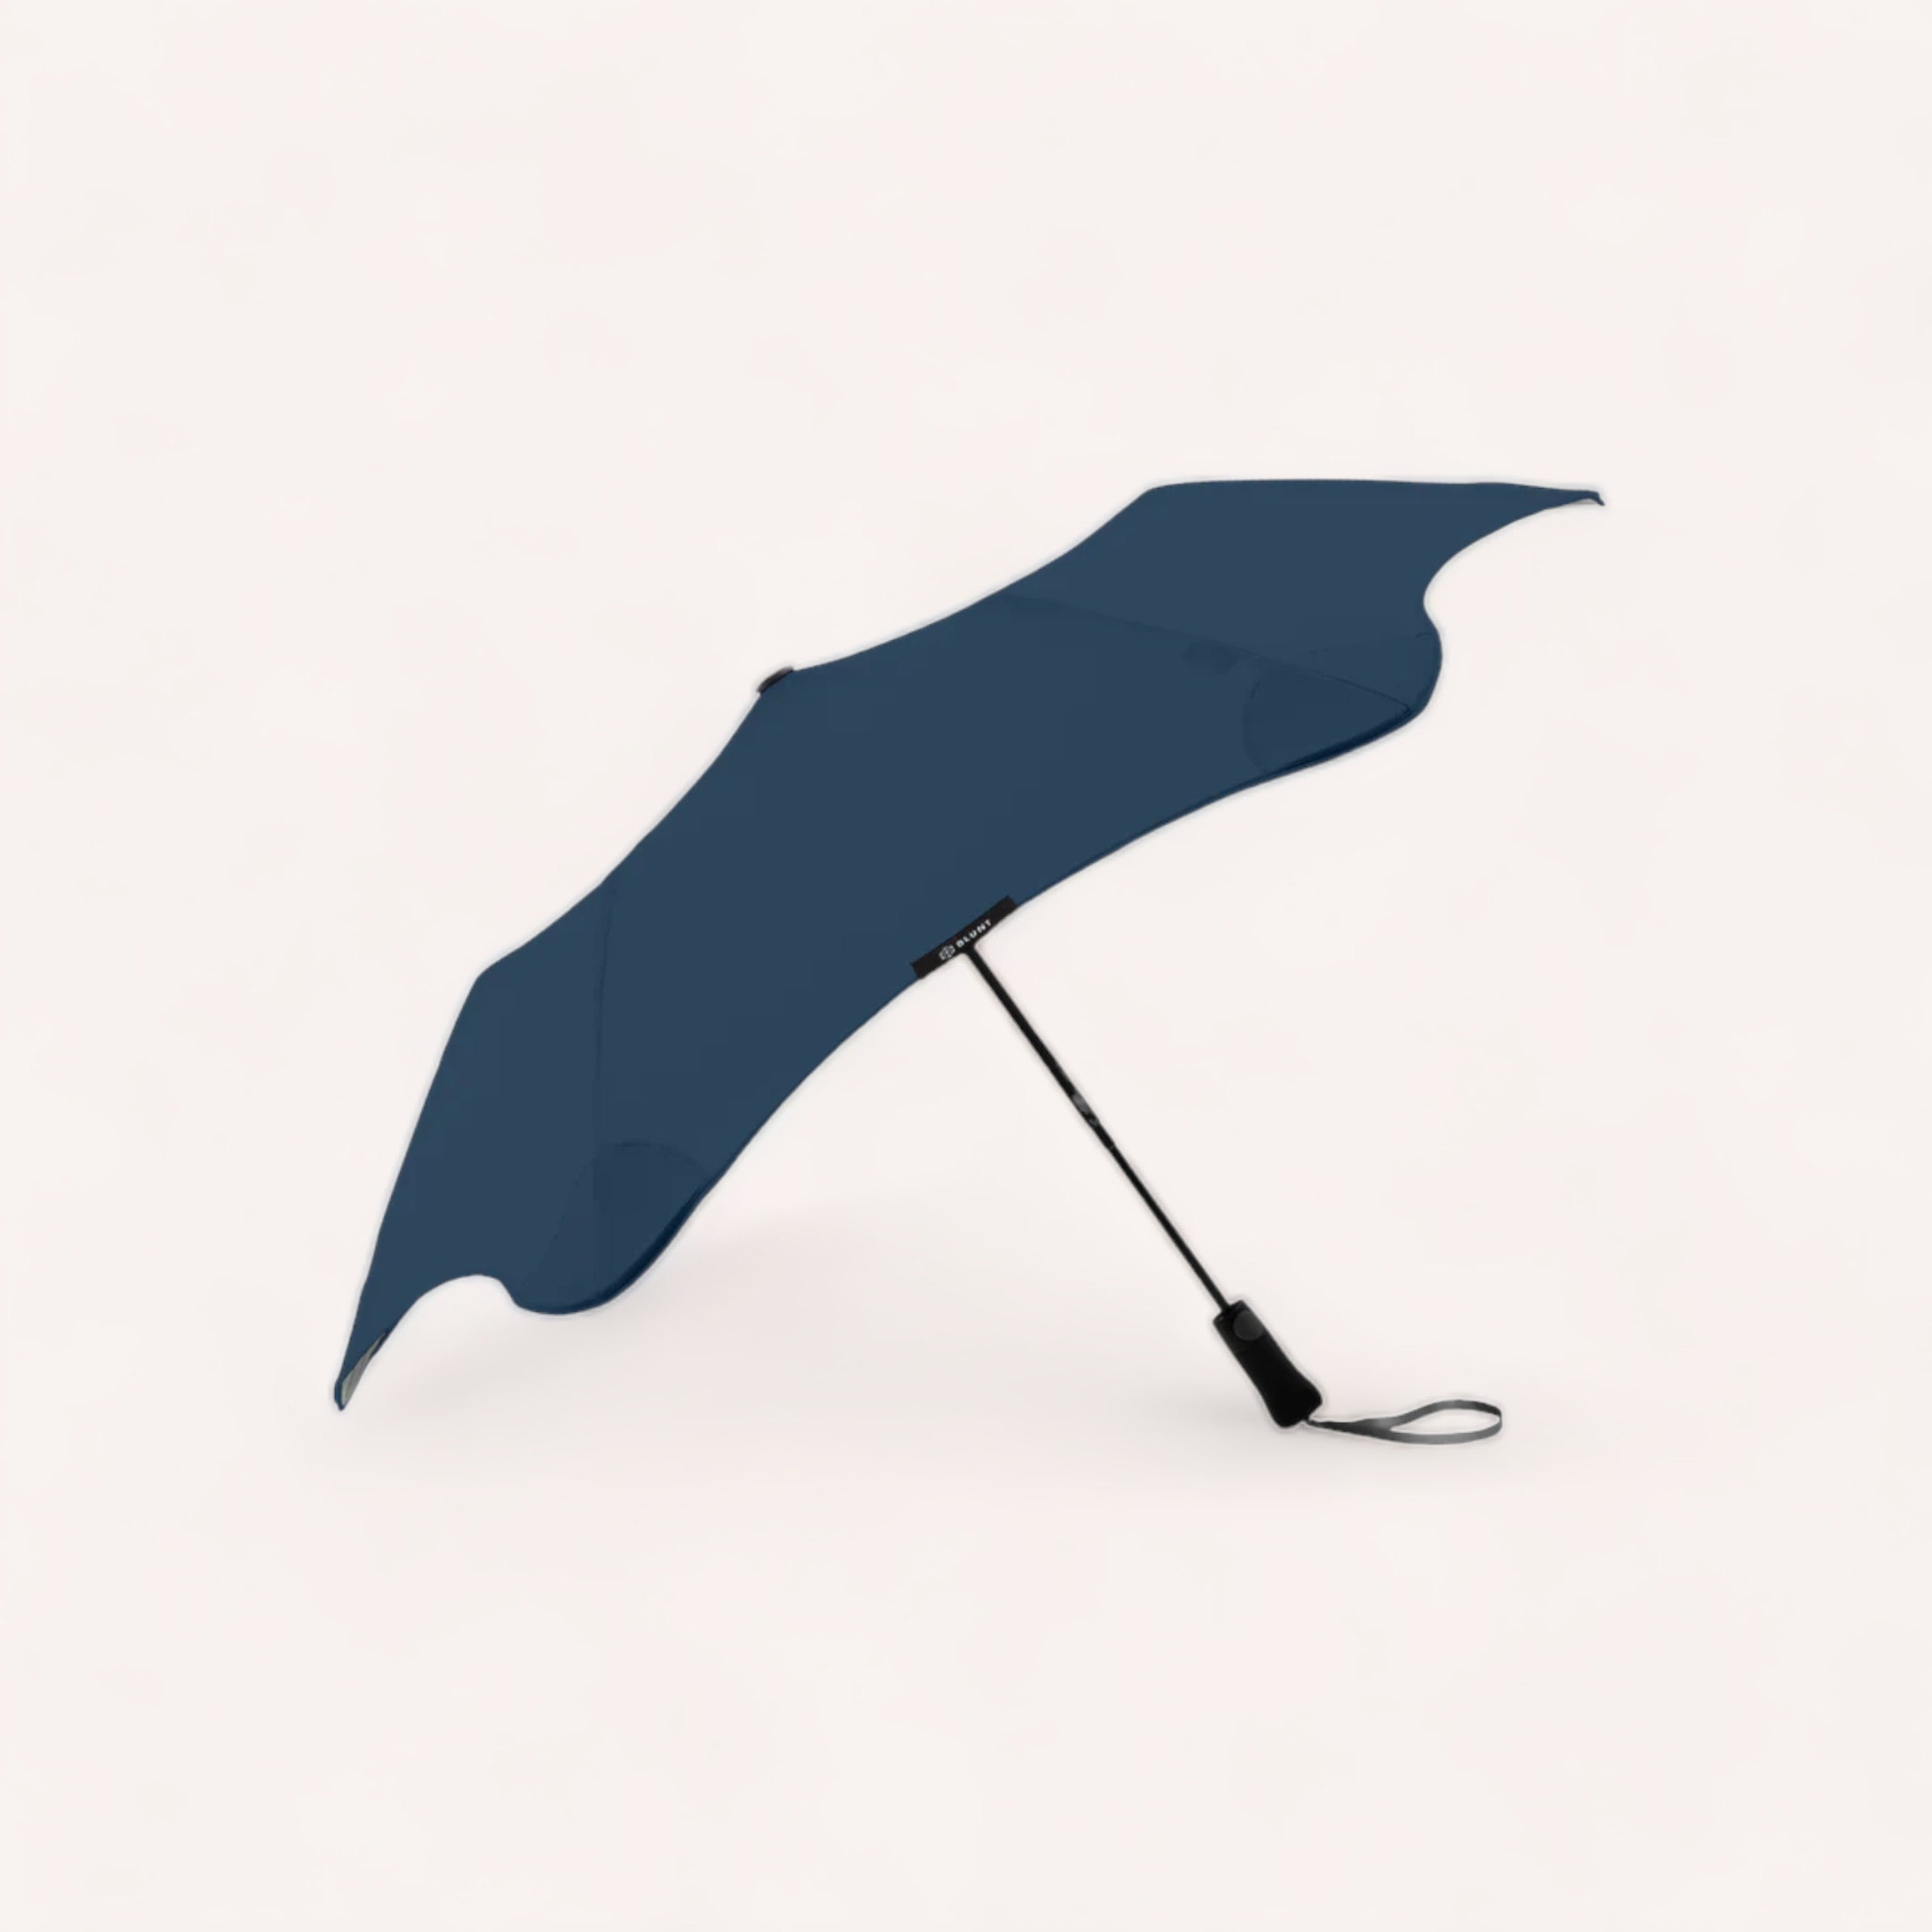 A BLUNT Metro navy blue compact umbrella with an auto-open canopy lying on its side against a white background.